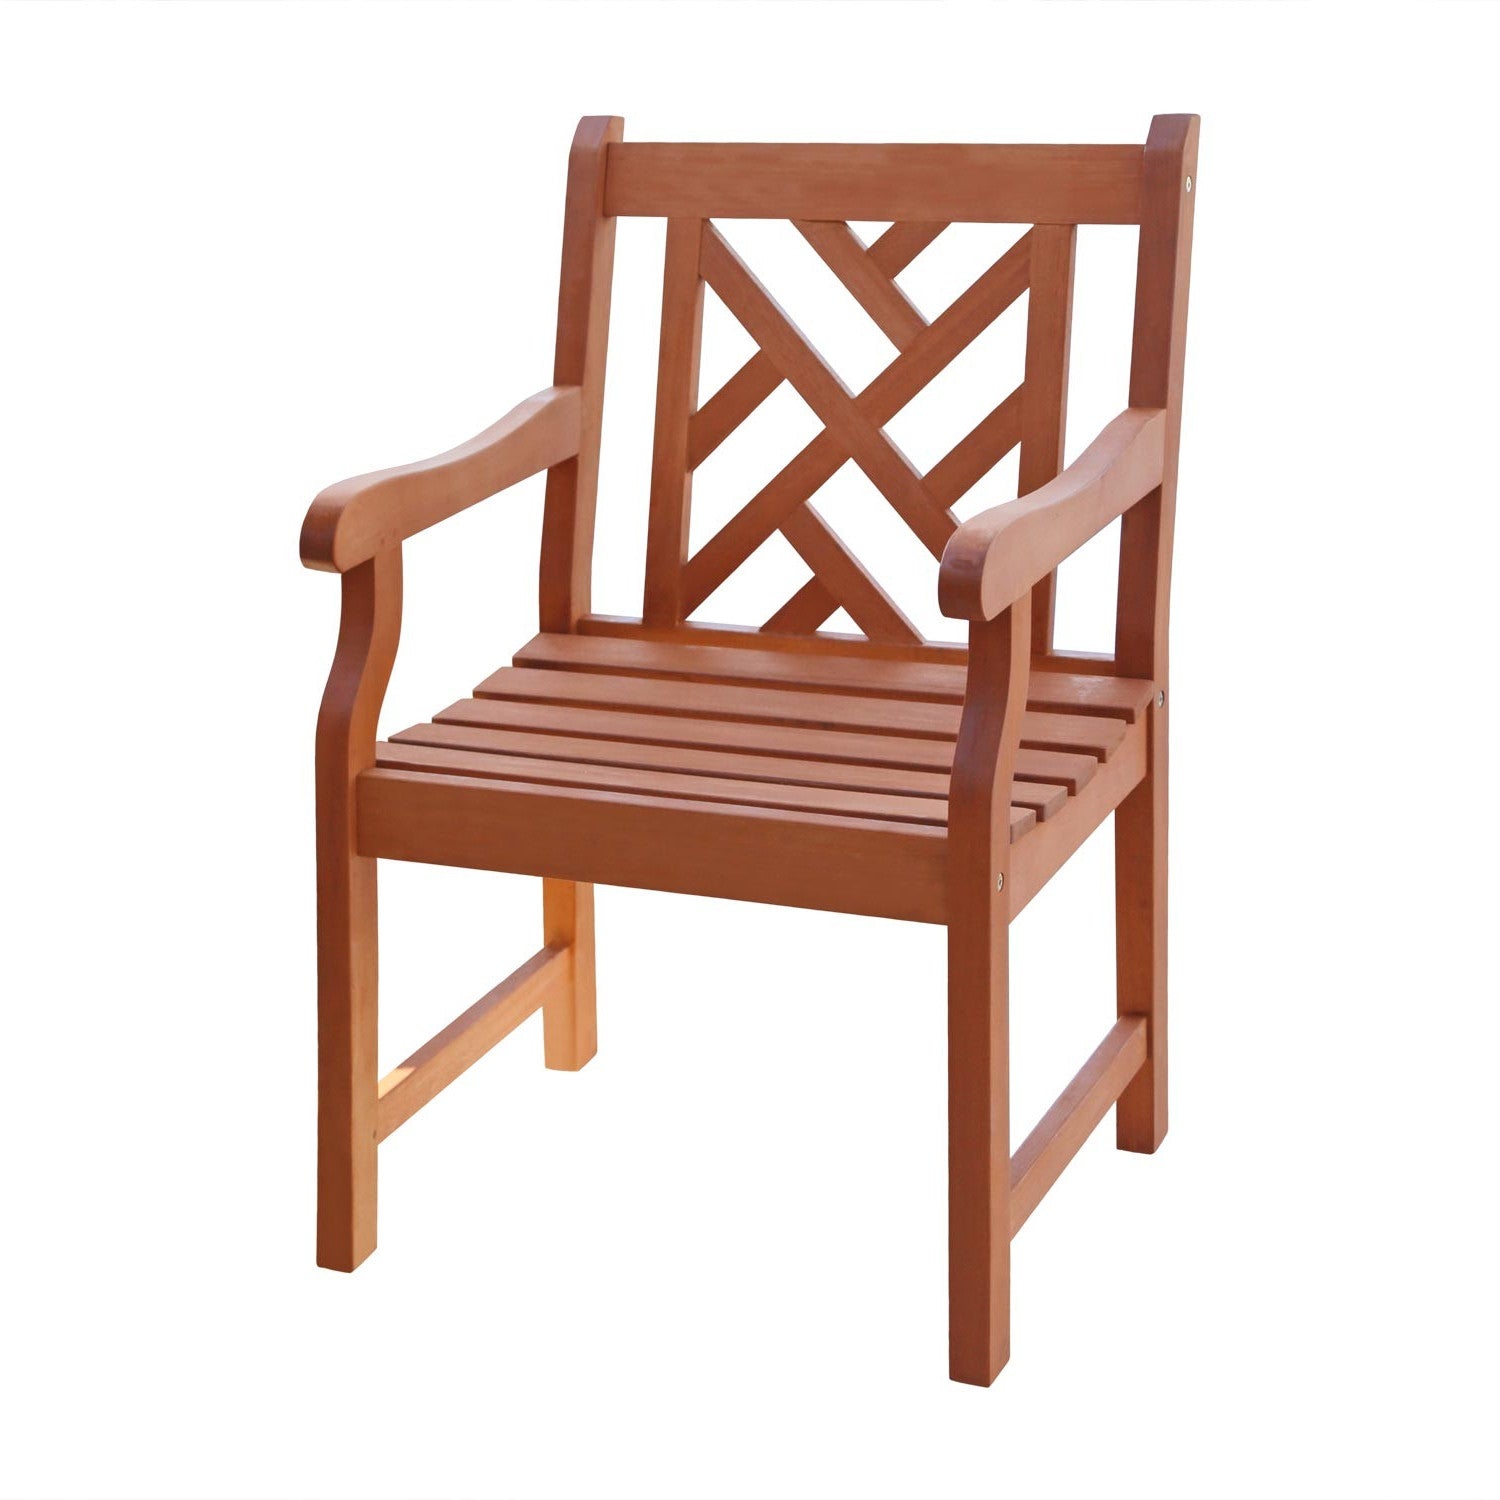 Brown Patio Armchair With Diagonal Design - Tuesday Morning-Outdoor Chairs